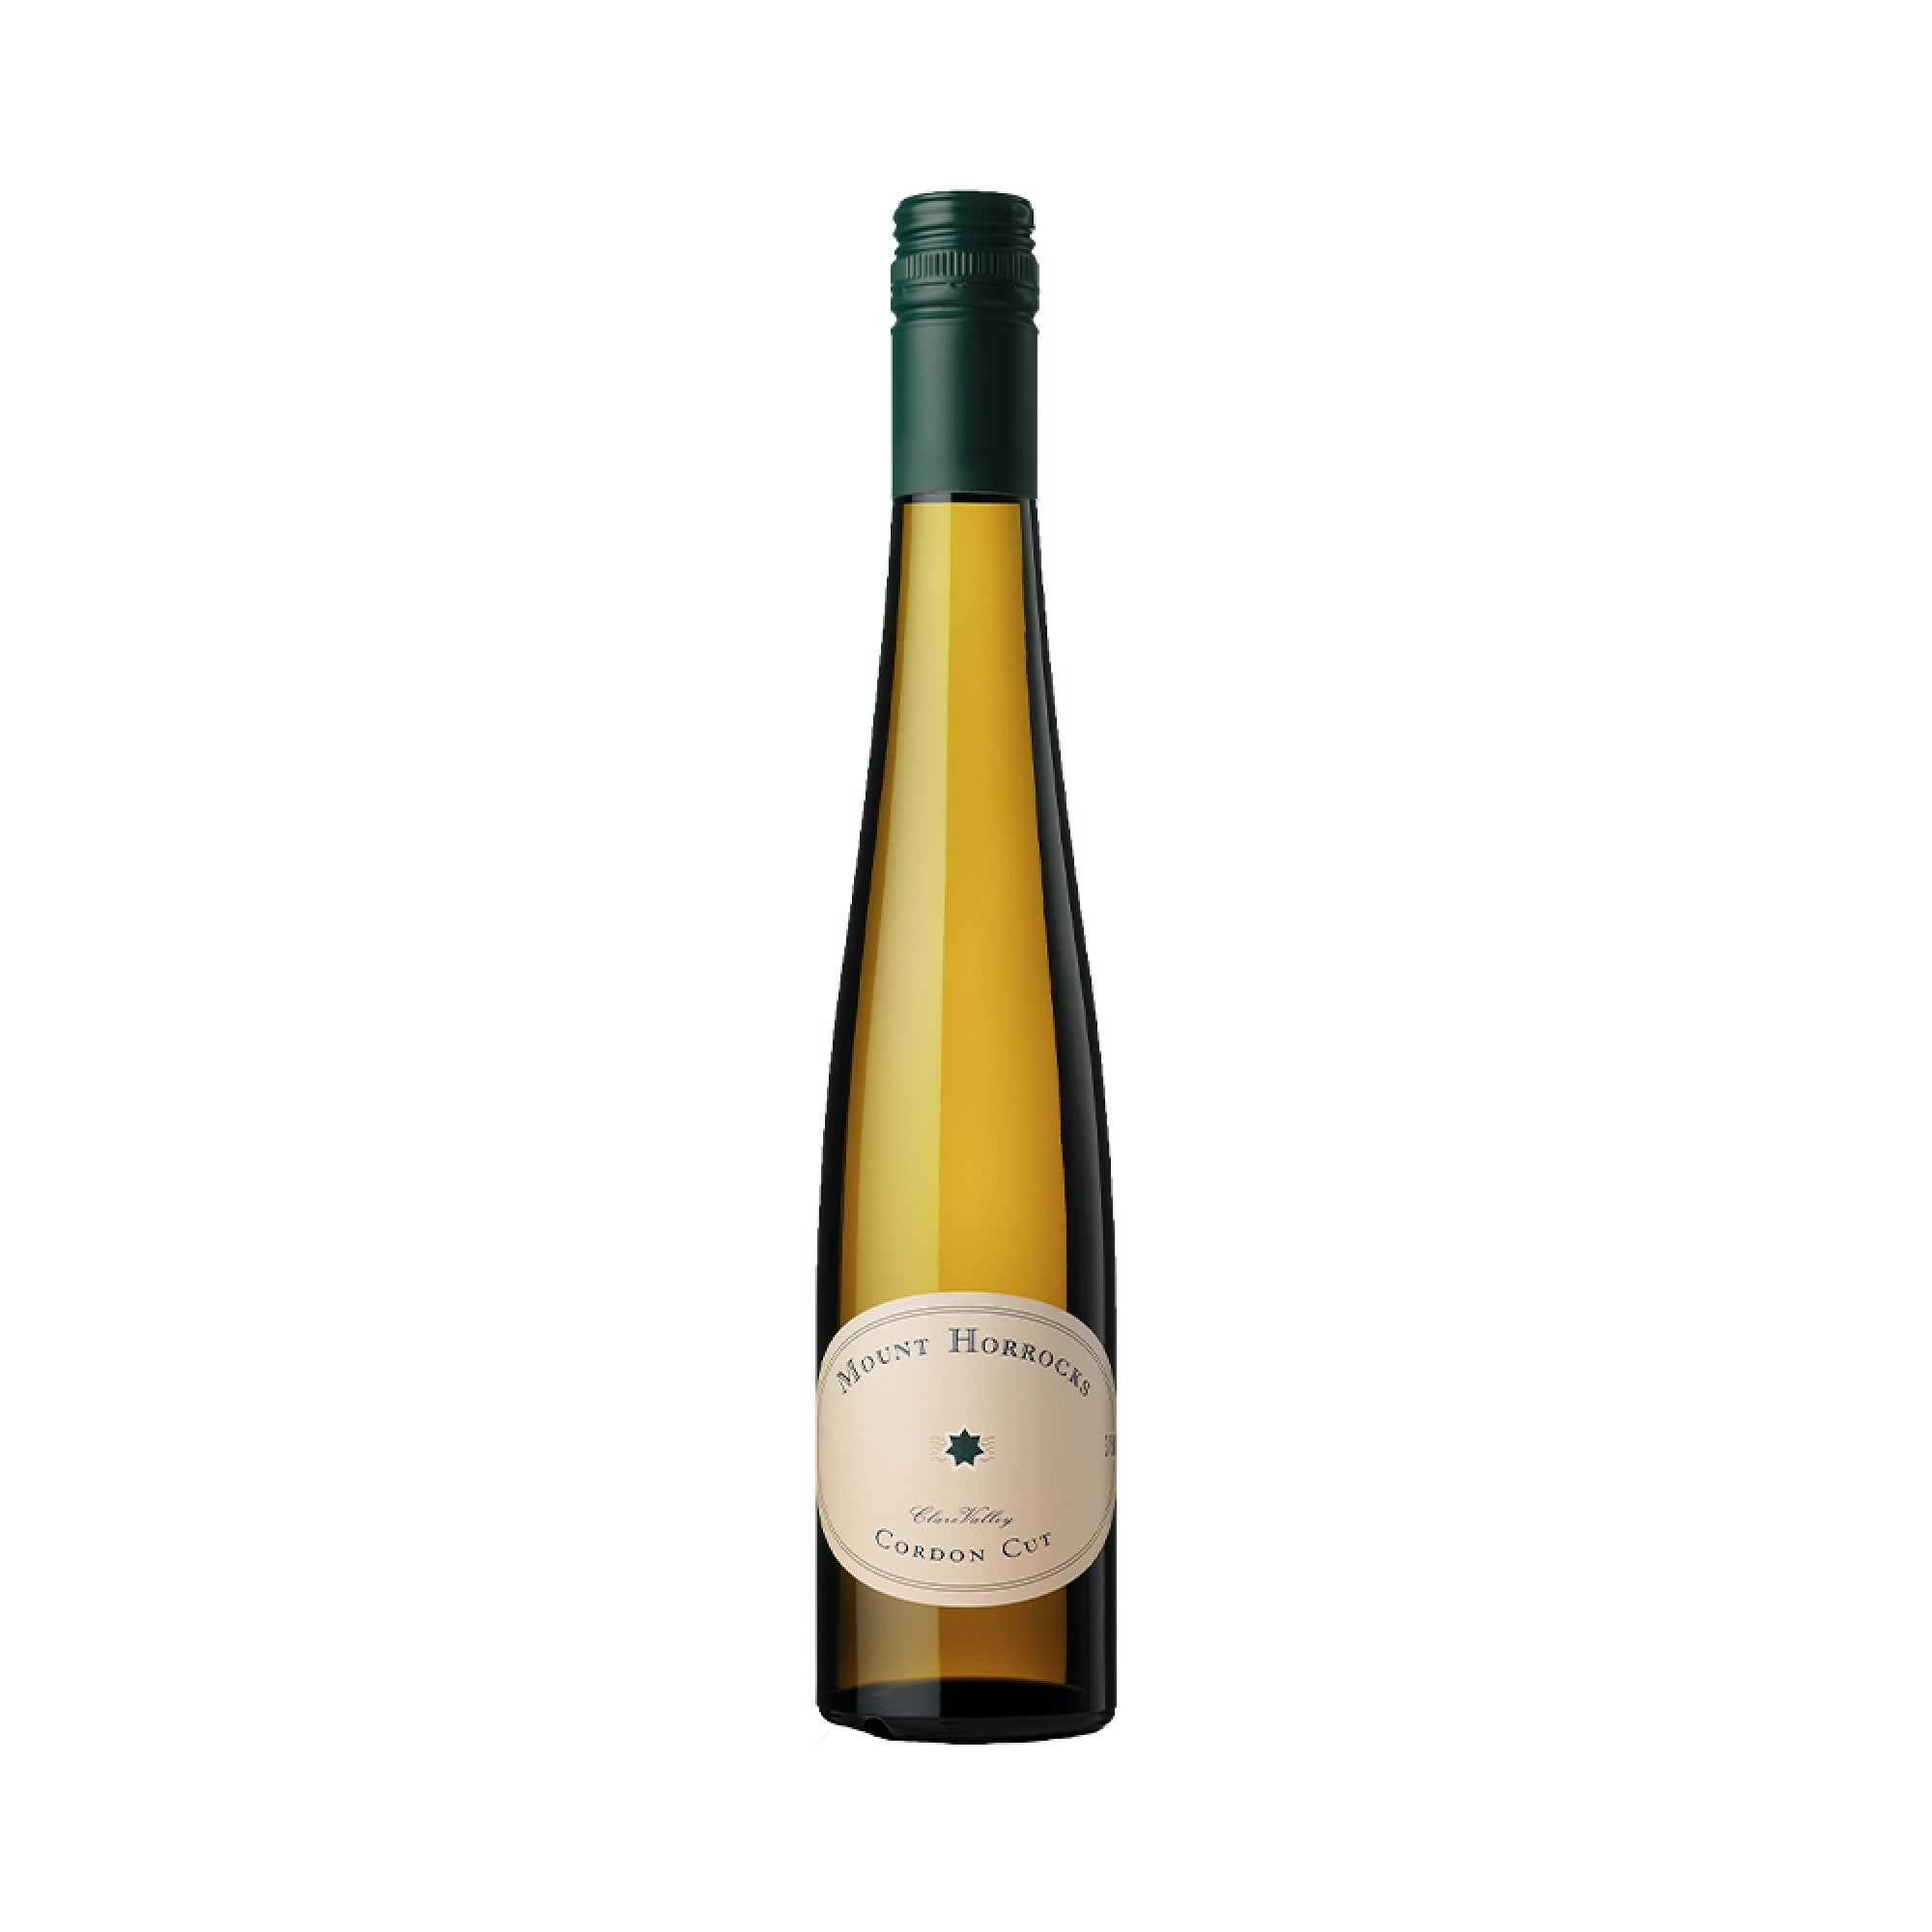 Mount Horrocks 'Cordon Cut' Clare Valley Riesling